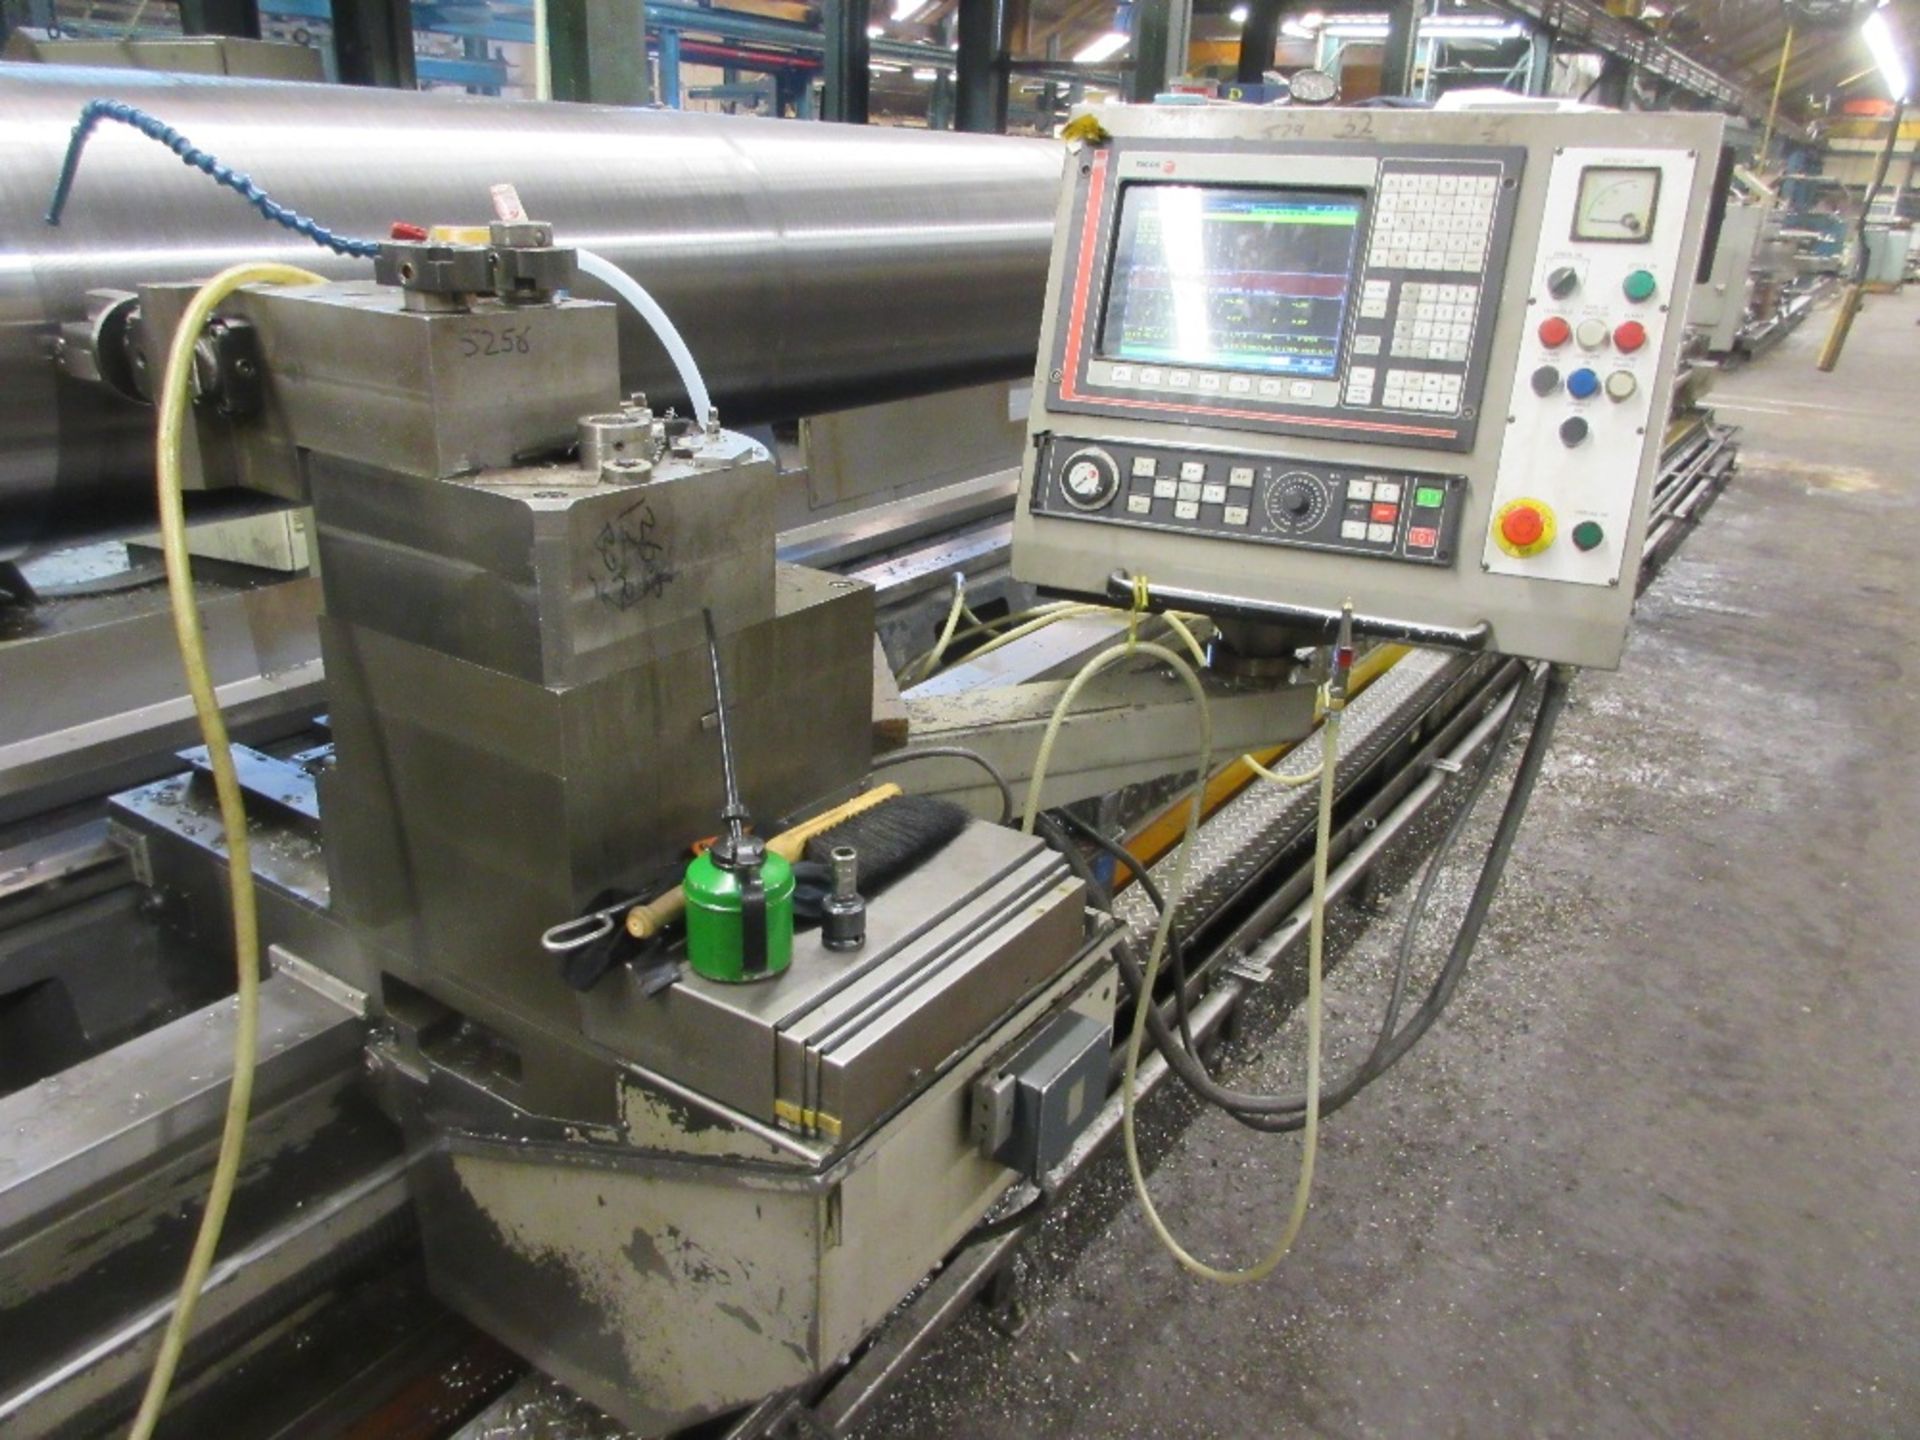 Binns & Berry L1000 CNC gap bed lathe 45" swing x 42ft between centres. Serial No. 80032/R ( - Image 2 of 4